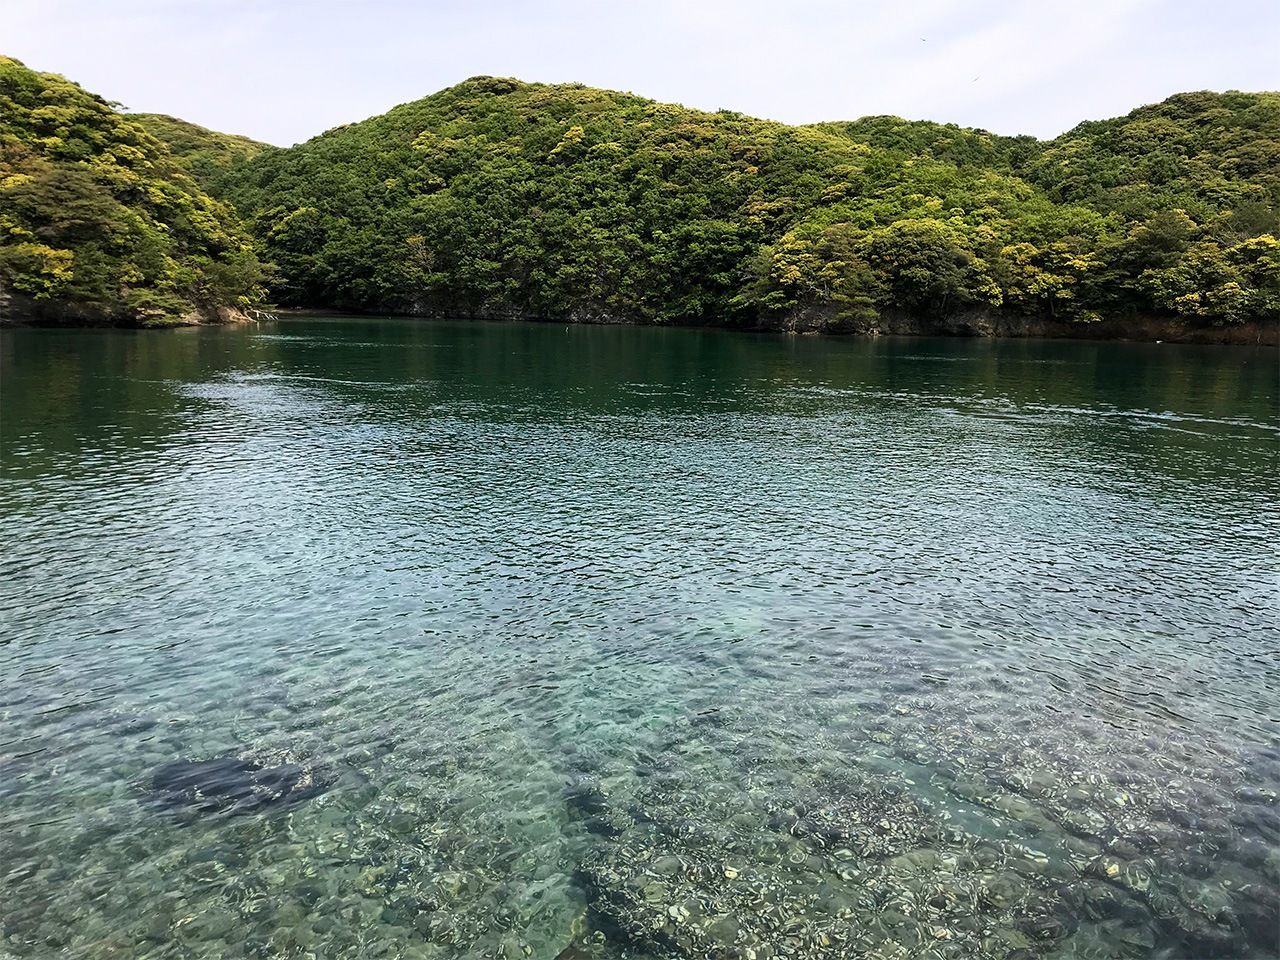 The blue waters and green hills of Tsushima.